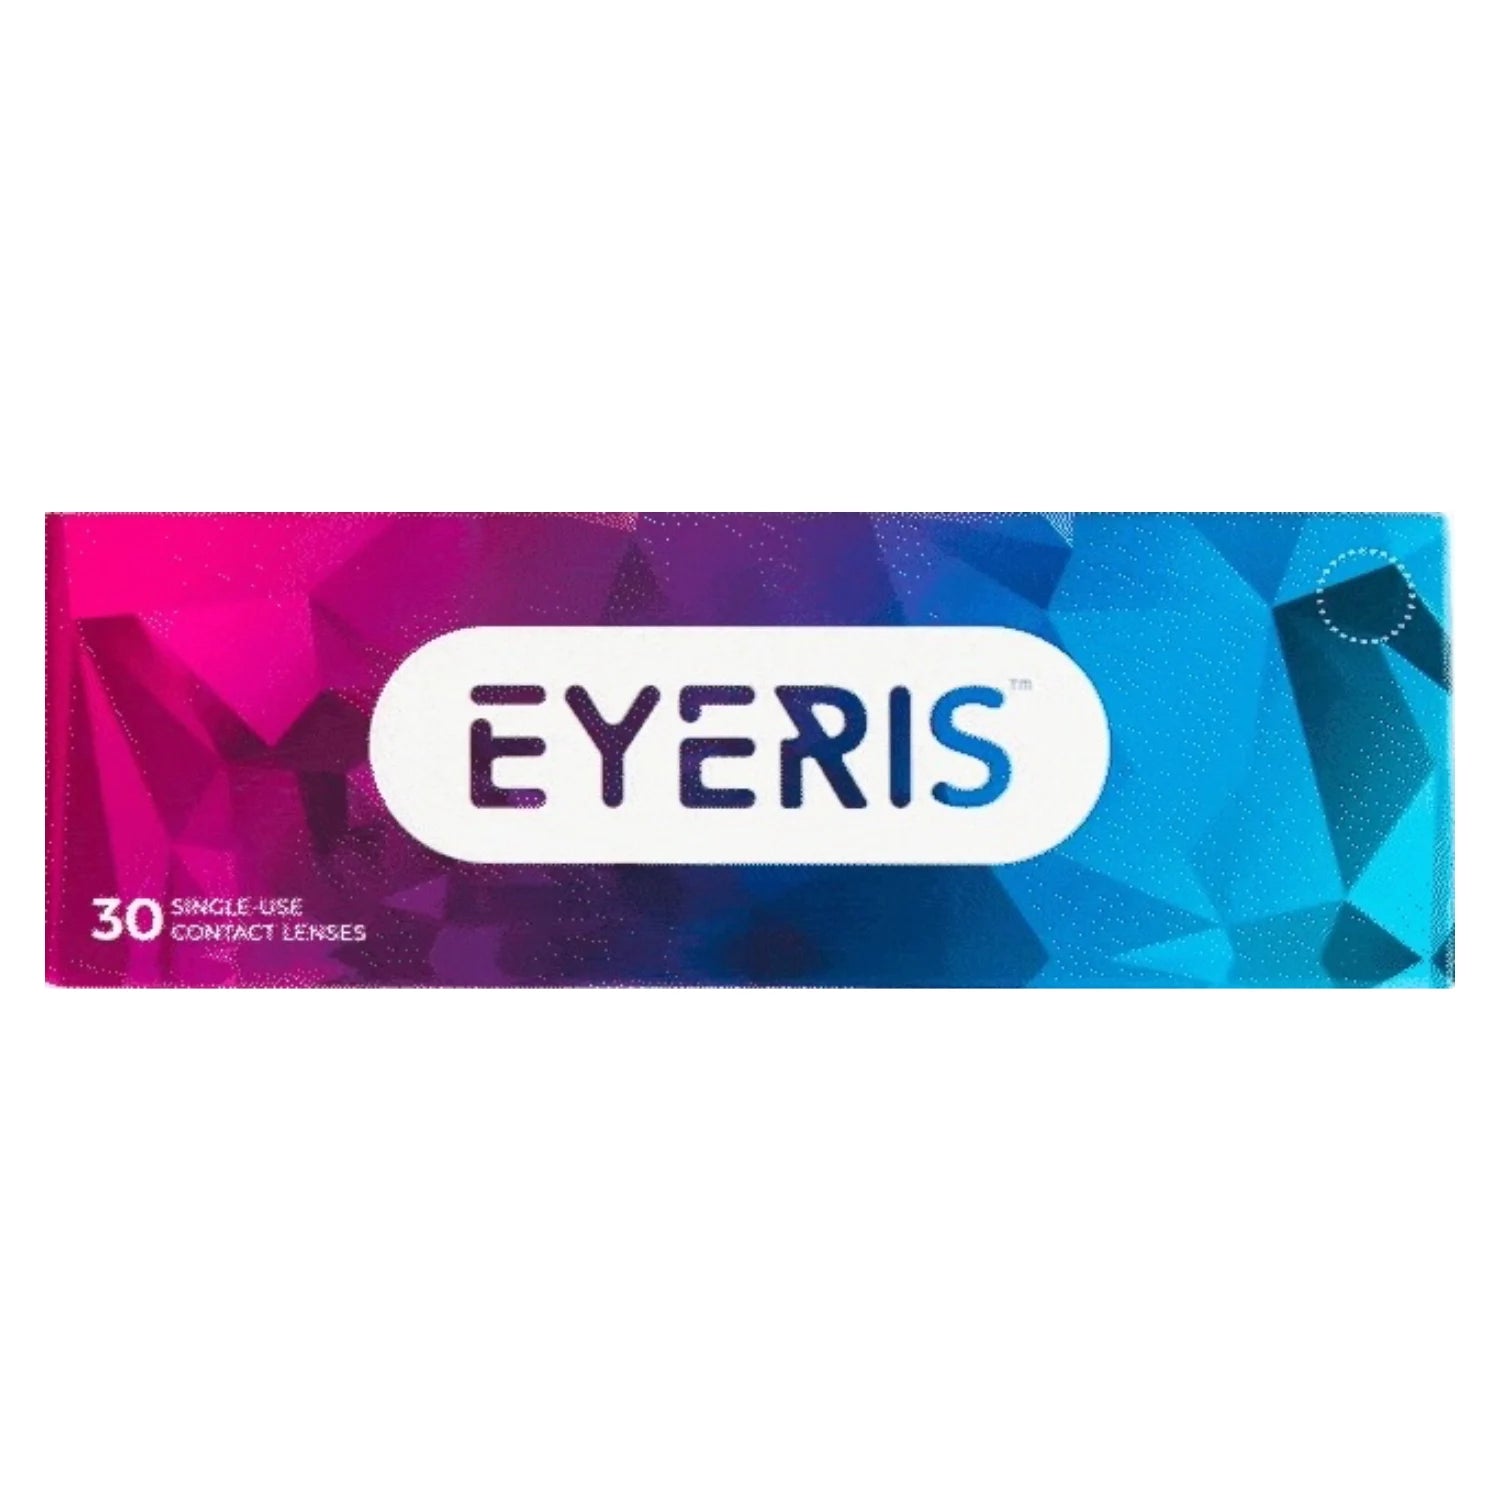 EYERIS certified contact lenses online at low price